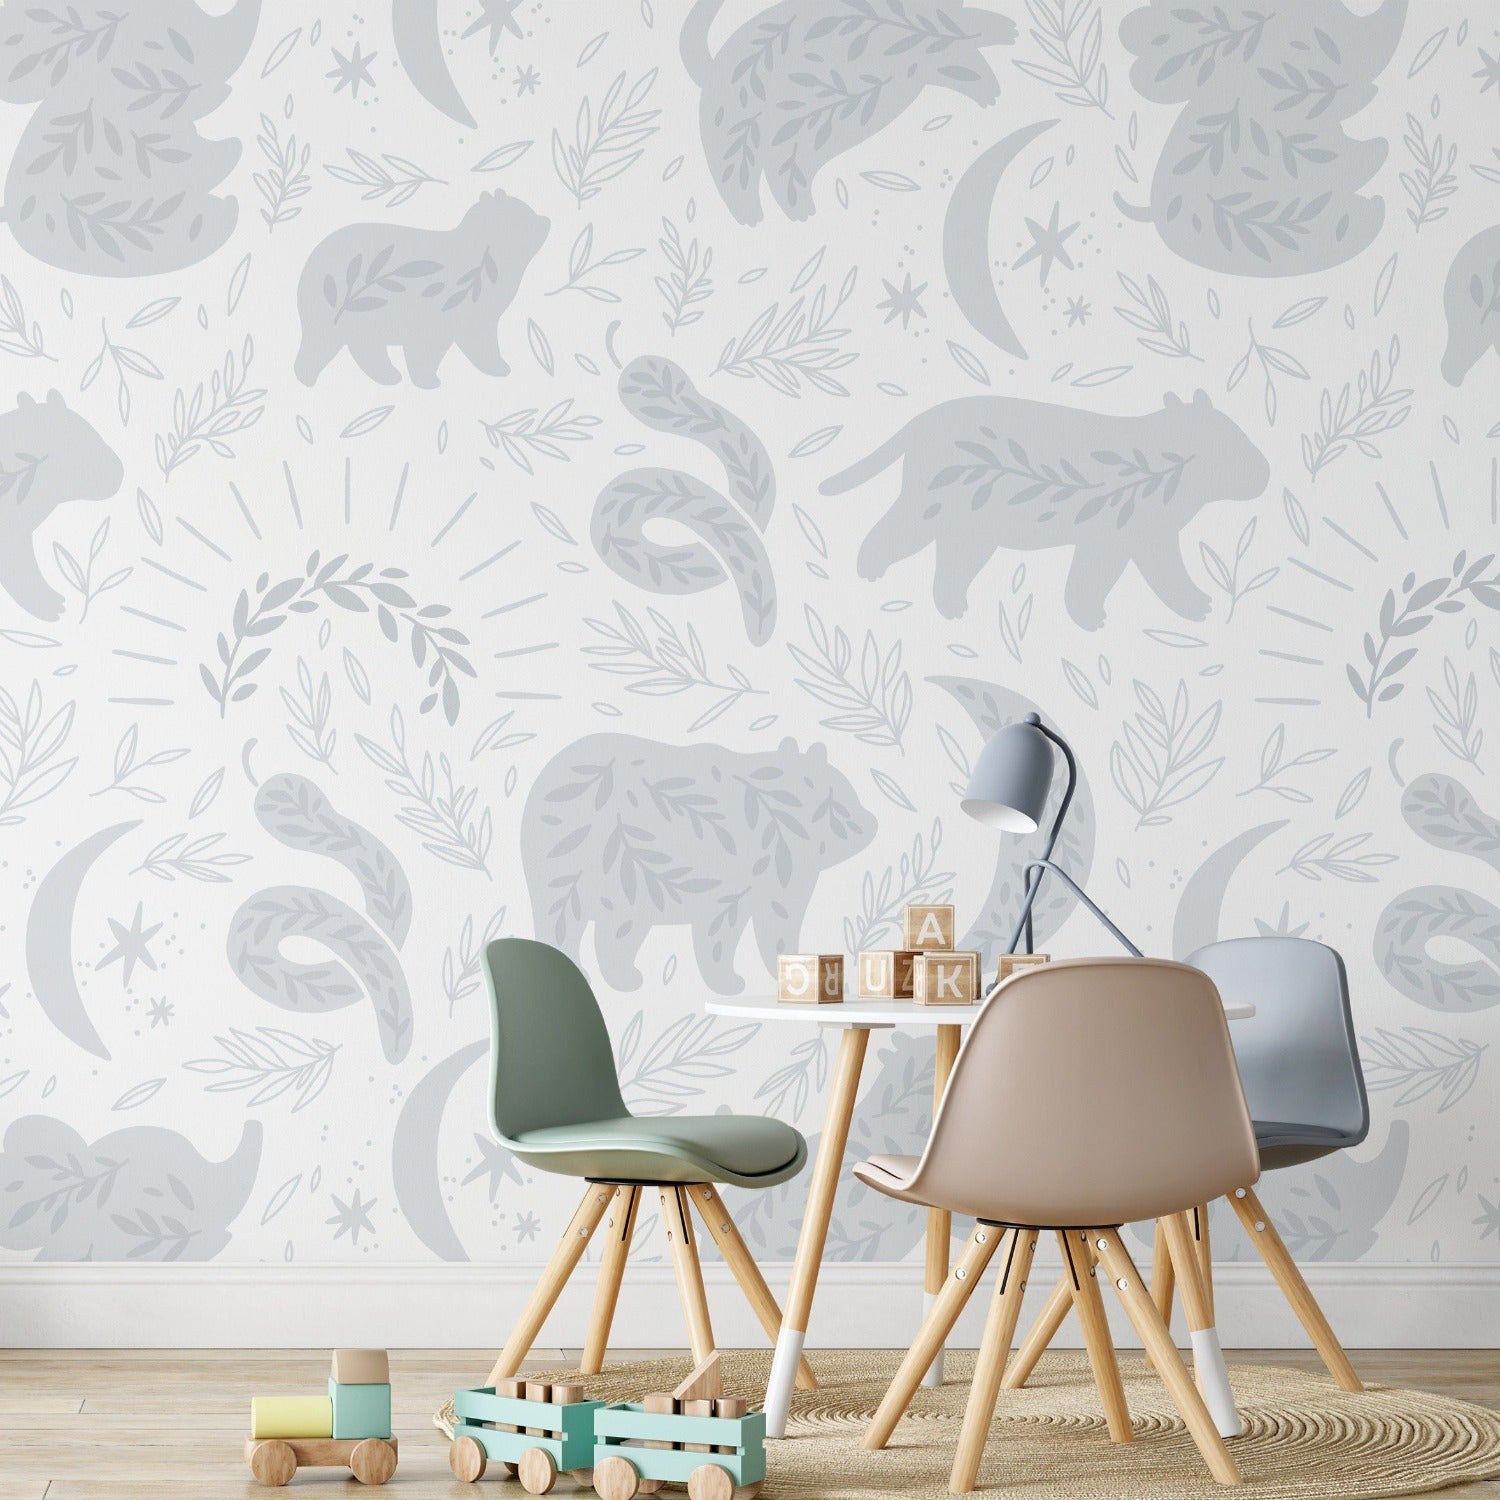 The Big Kids Boho Wallpaper creates an enchanting backdrop in a child's play area, featuring pale blue forest creatures and celestial motifs amongst foliage. The gentle hues and bohemian design inspire calm and creativity in the room.